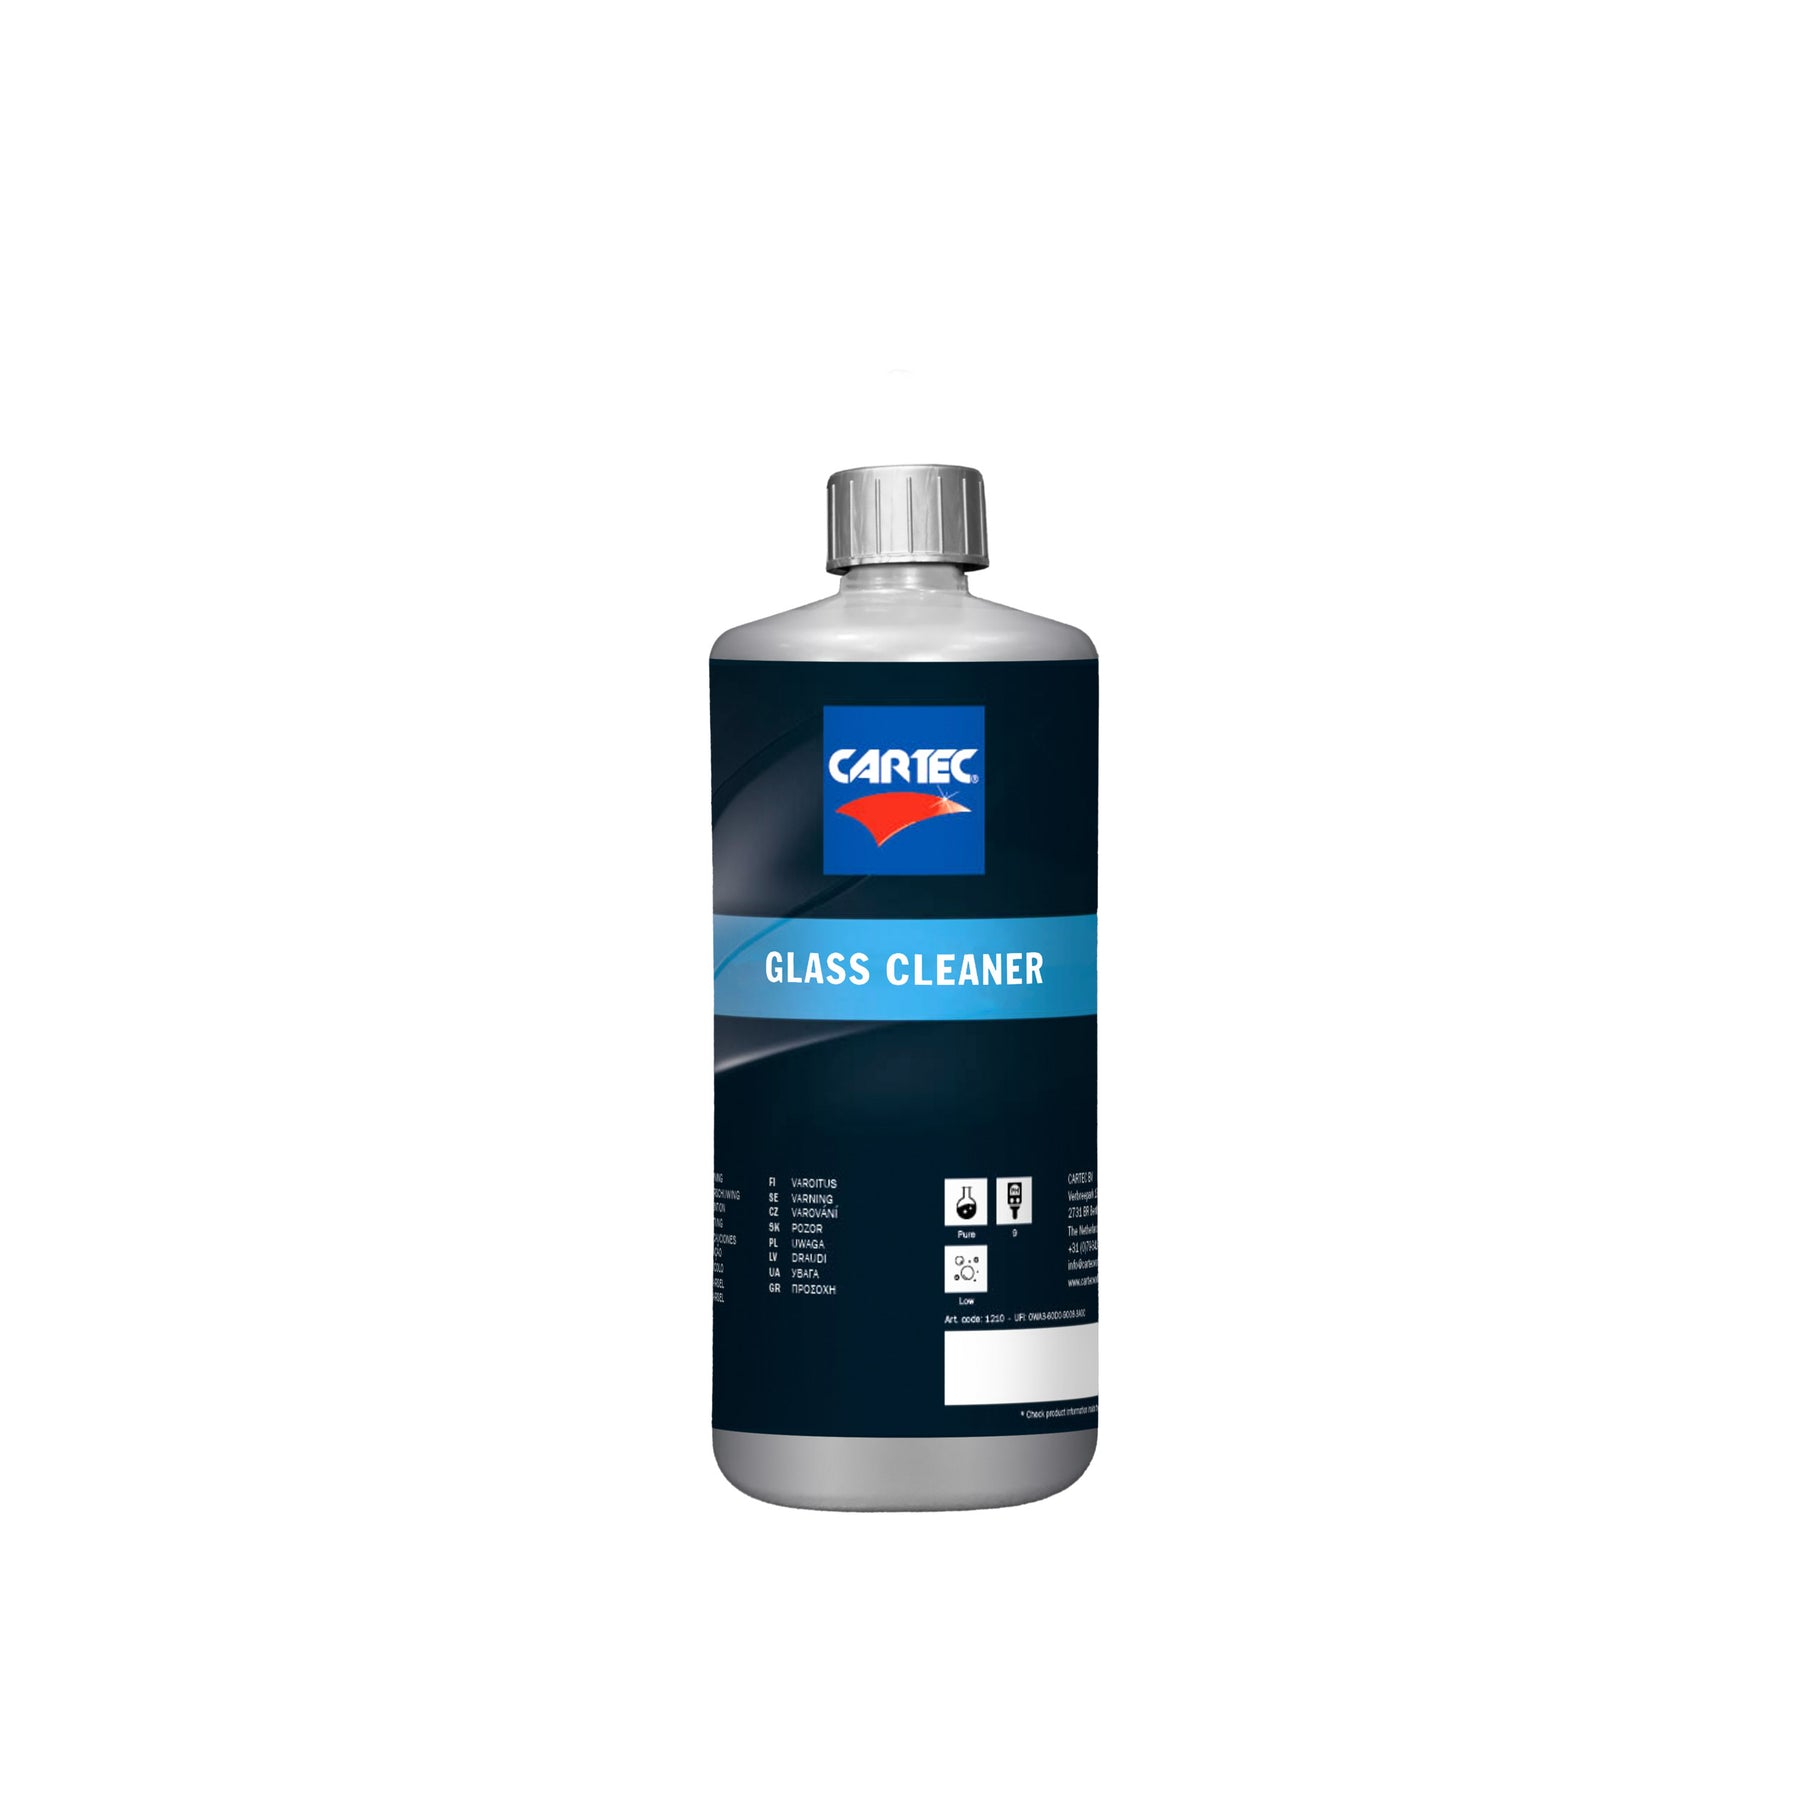 CARTEC Glass Cleaner